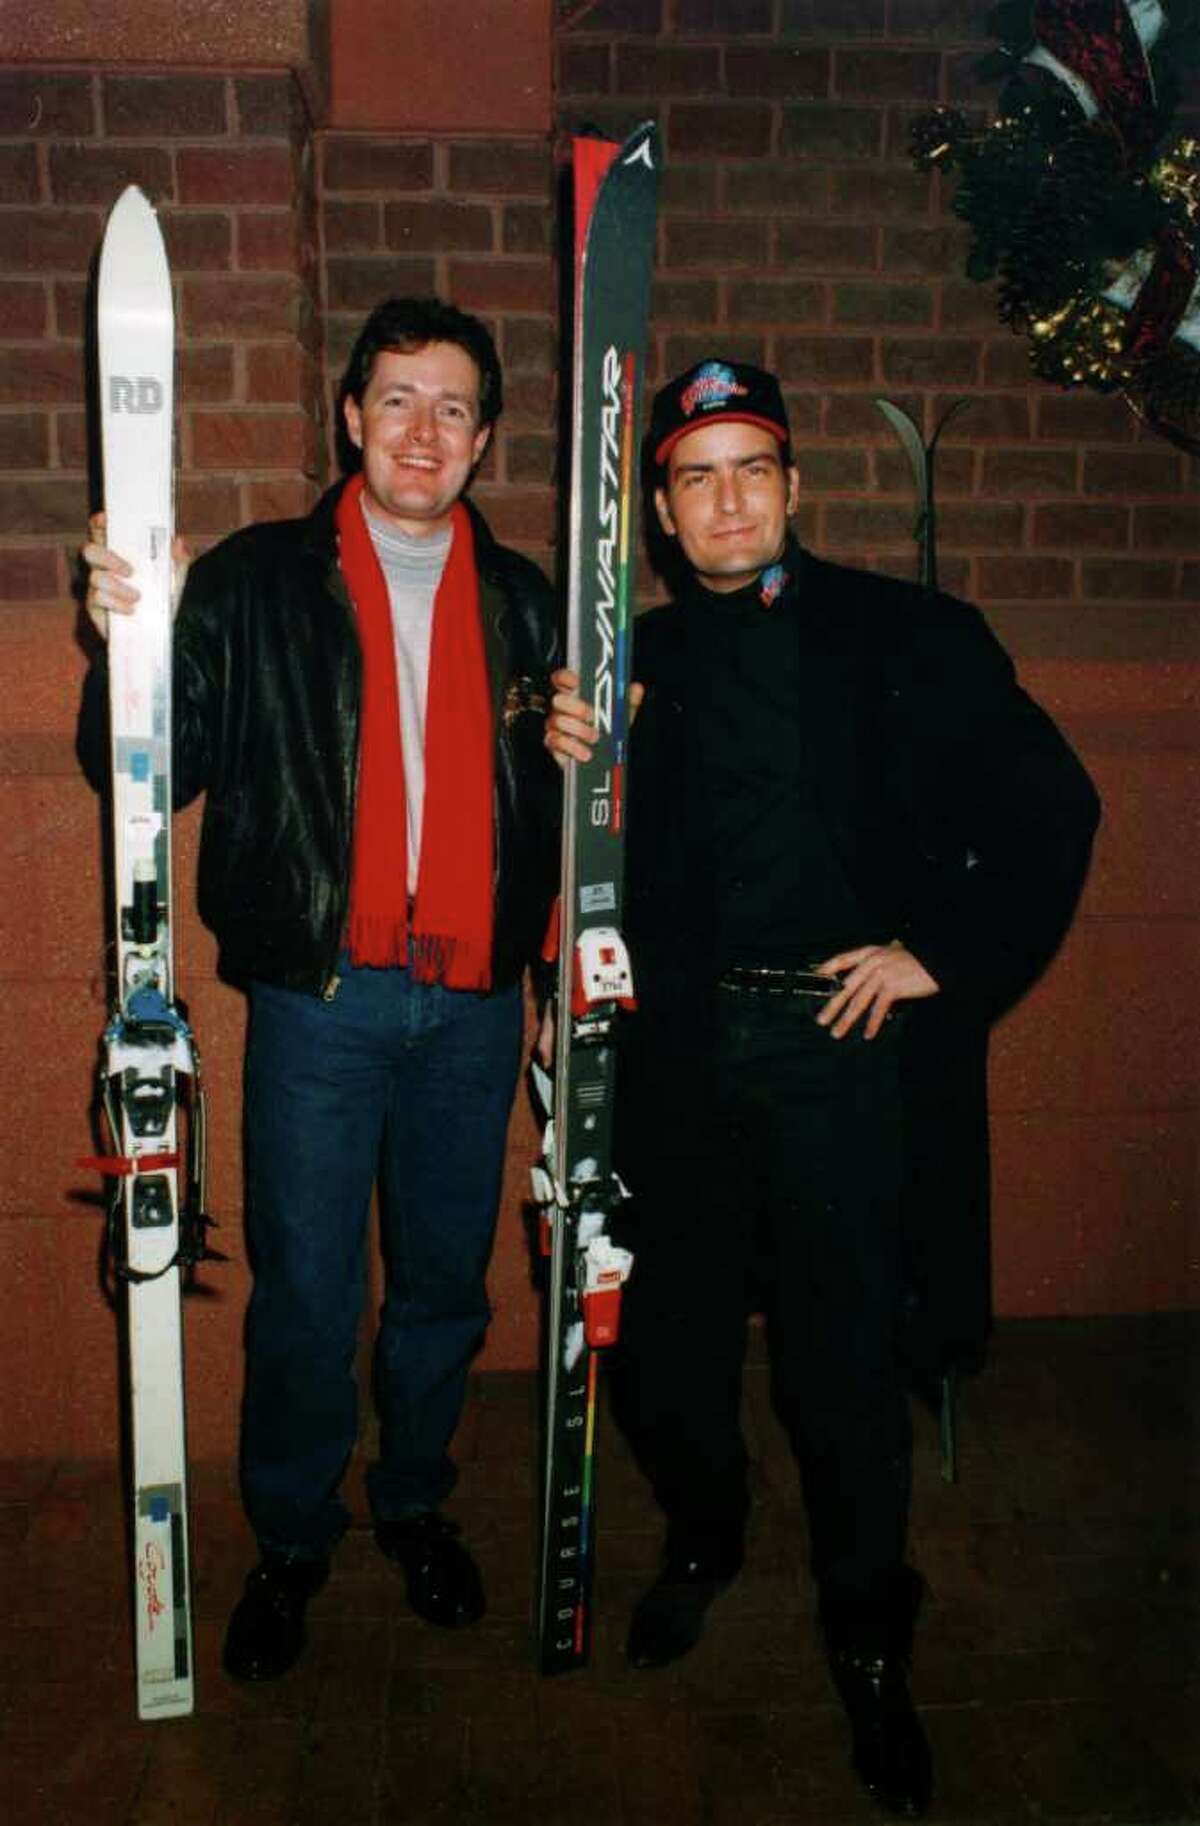 LONDON - FILE PHOTO: Newspaper editor Piers Morgan poses with actor Charlie Sheen during his time as editor of the Bizarre showbusiness column of The Sun newspapers. Piers Morgan edited Bizarre until 1994, when Rupert Murdoch made him Editor of News of The World. 2 years later he moved on to edit the Mirror where he stayed until May 2004 when he was sacked following the decision to publish photos of British soldiers apparently abusing Iraqi prisoners of war. Piers Morgan has been announced as a judge on Simon Cowell's new American talent show 'America's Got Talent' alongside Brandy and David Hasselhoff.